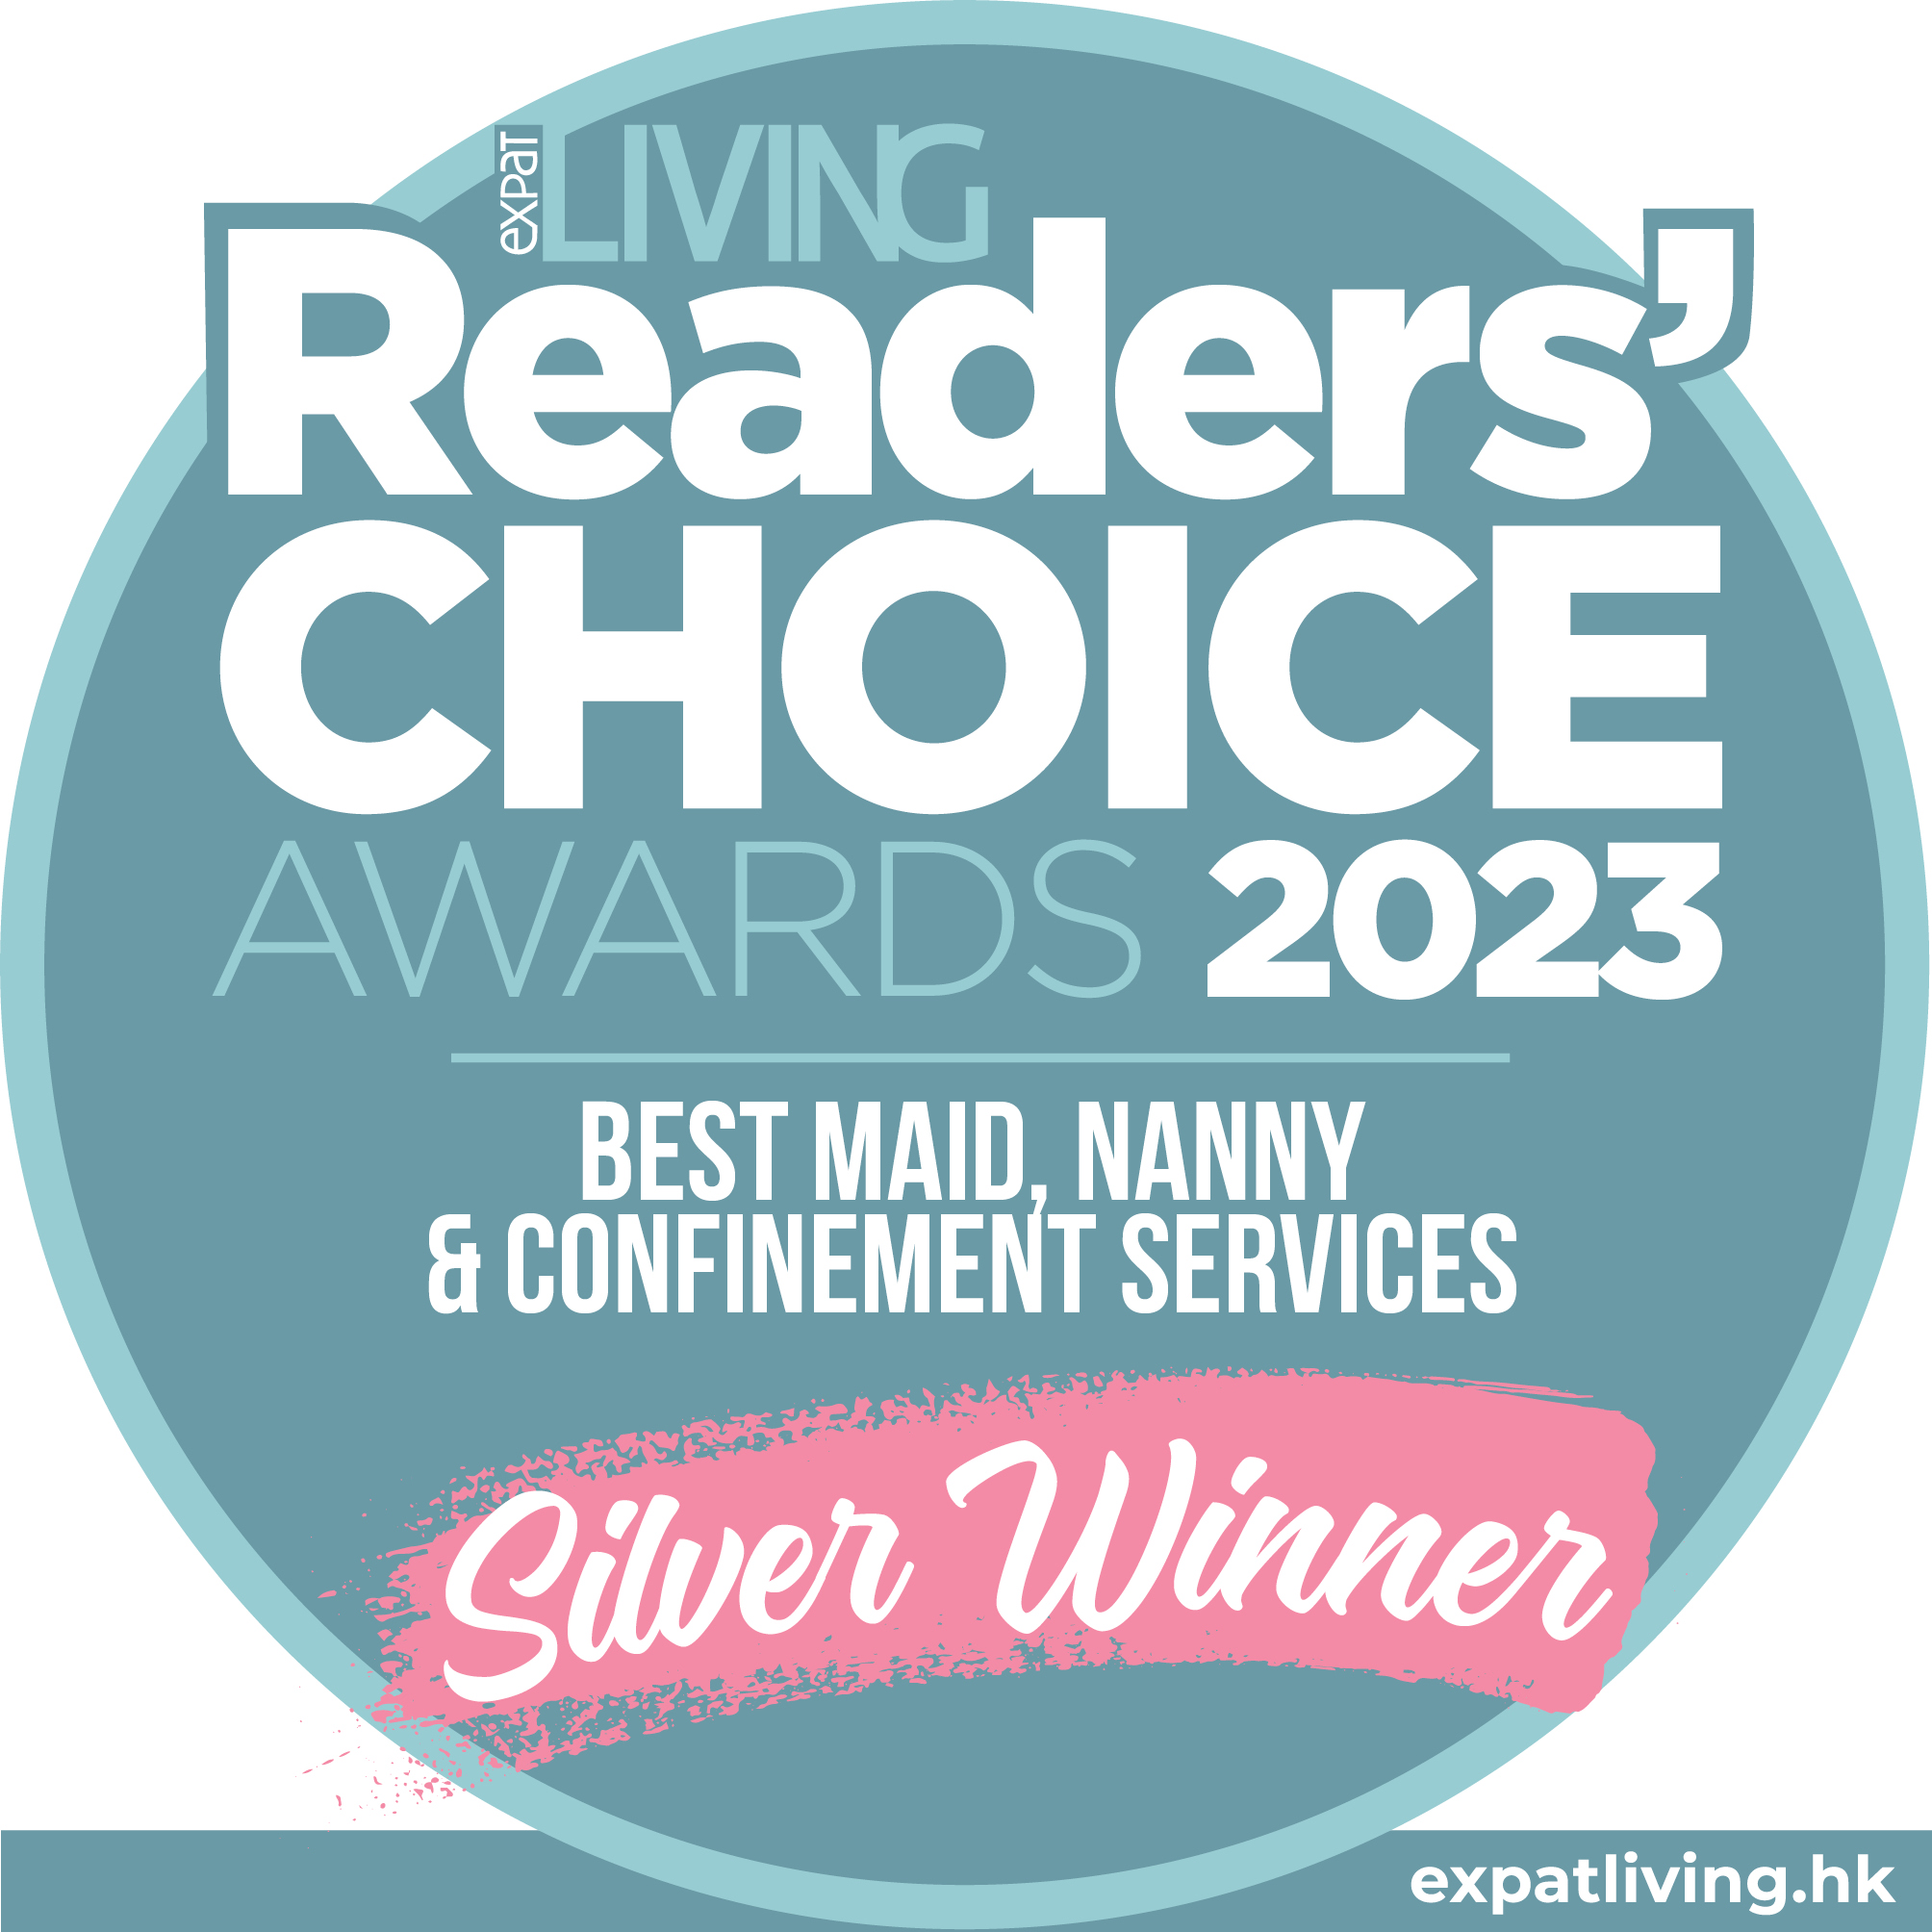 Silver winner of the Reader's Choice Awards 2023 for Best Maid, Nanny & Confinemet Services